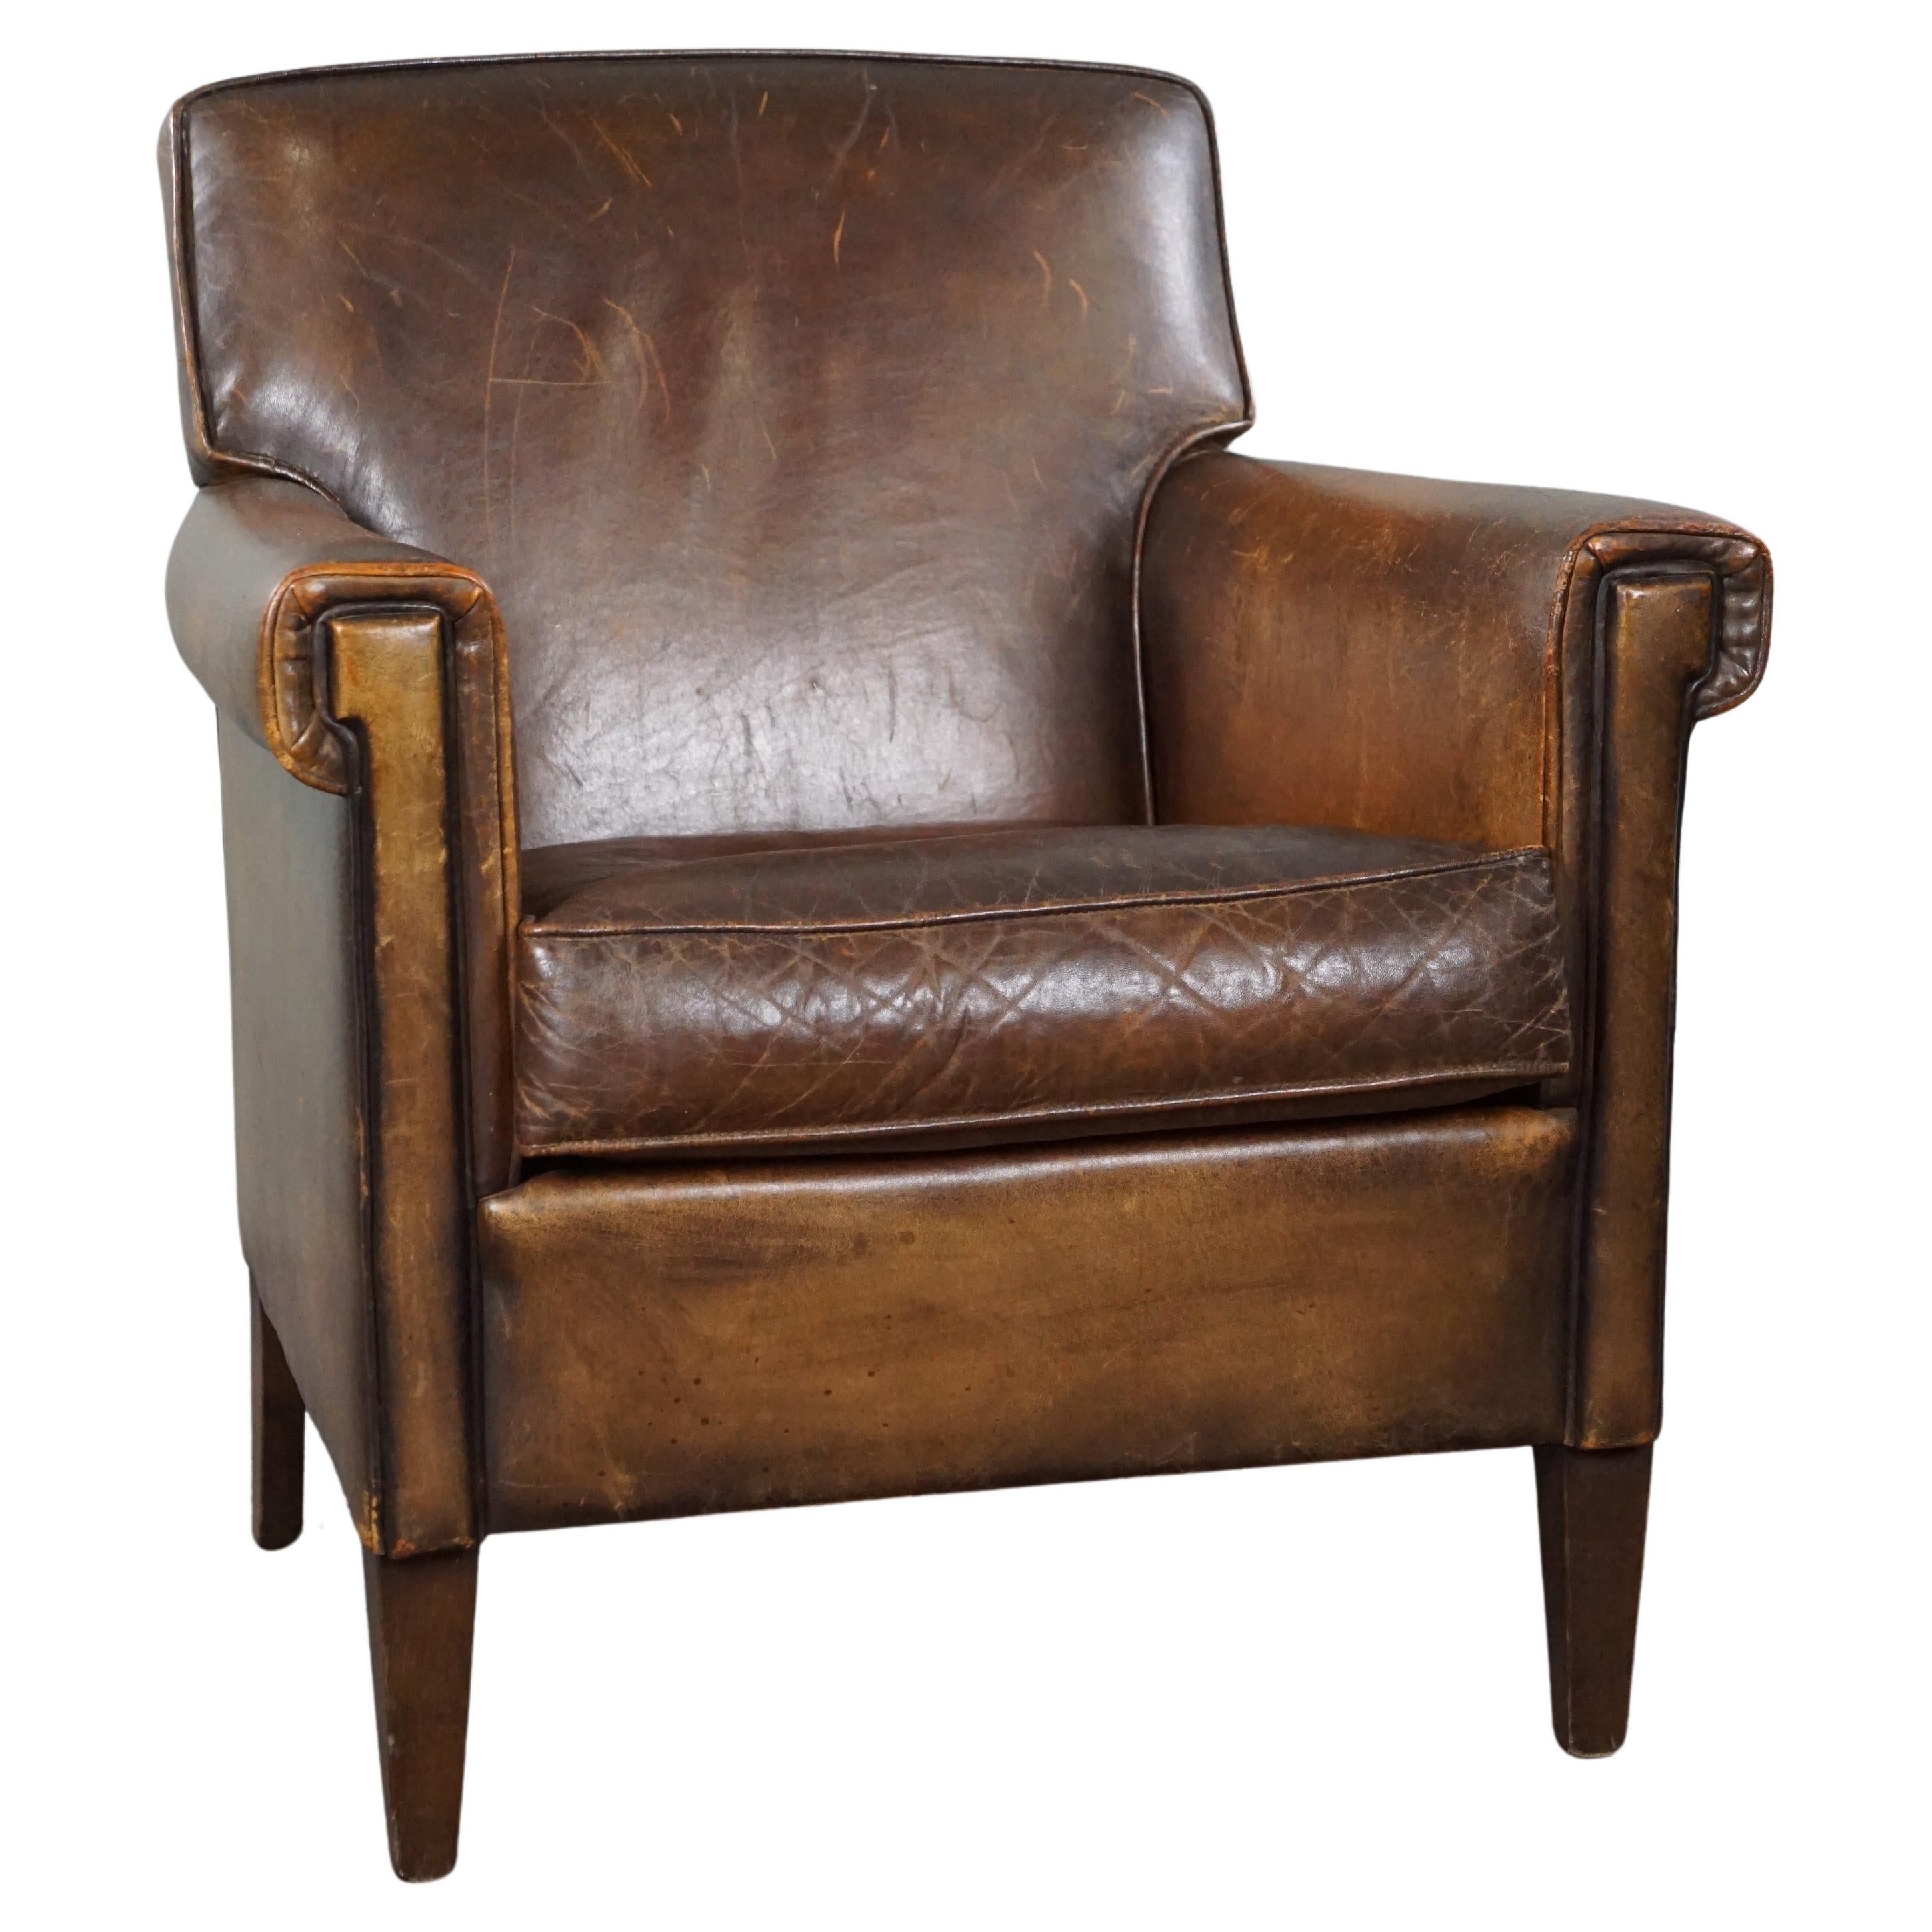 Beautiful old sheep leather armchair with a positively lived-in character For Sale